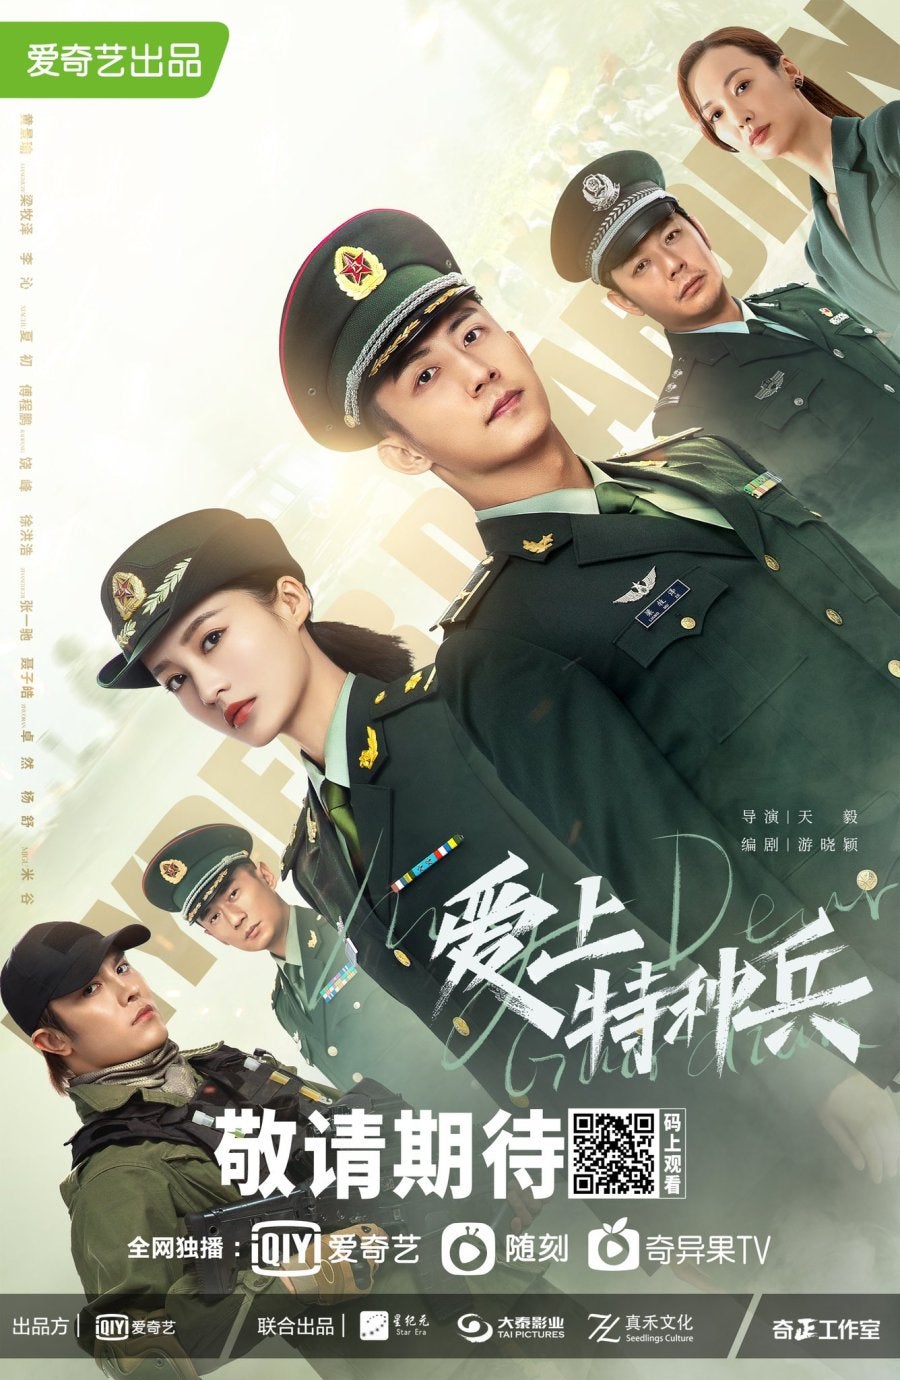 TV ratings for My Dear Guardian (亲爱的戎装) in South Korea. iqiyi TV series